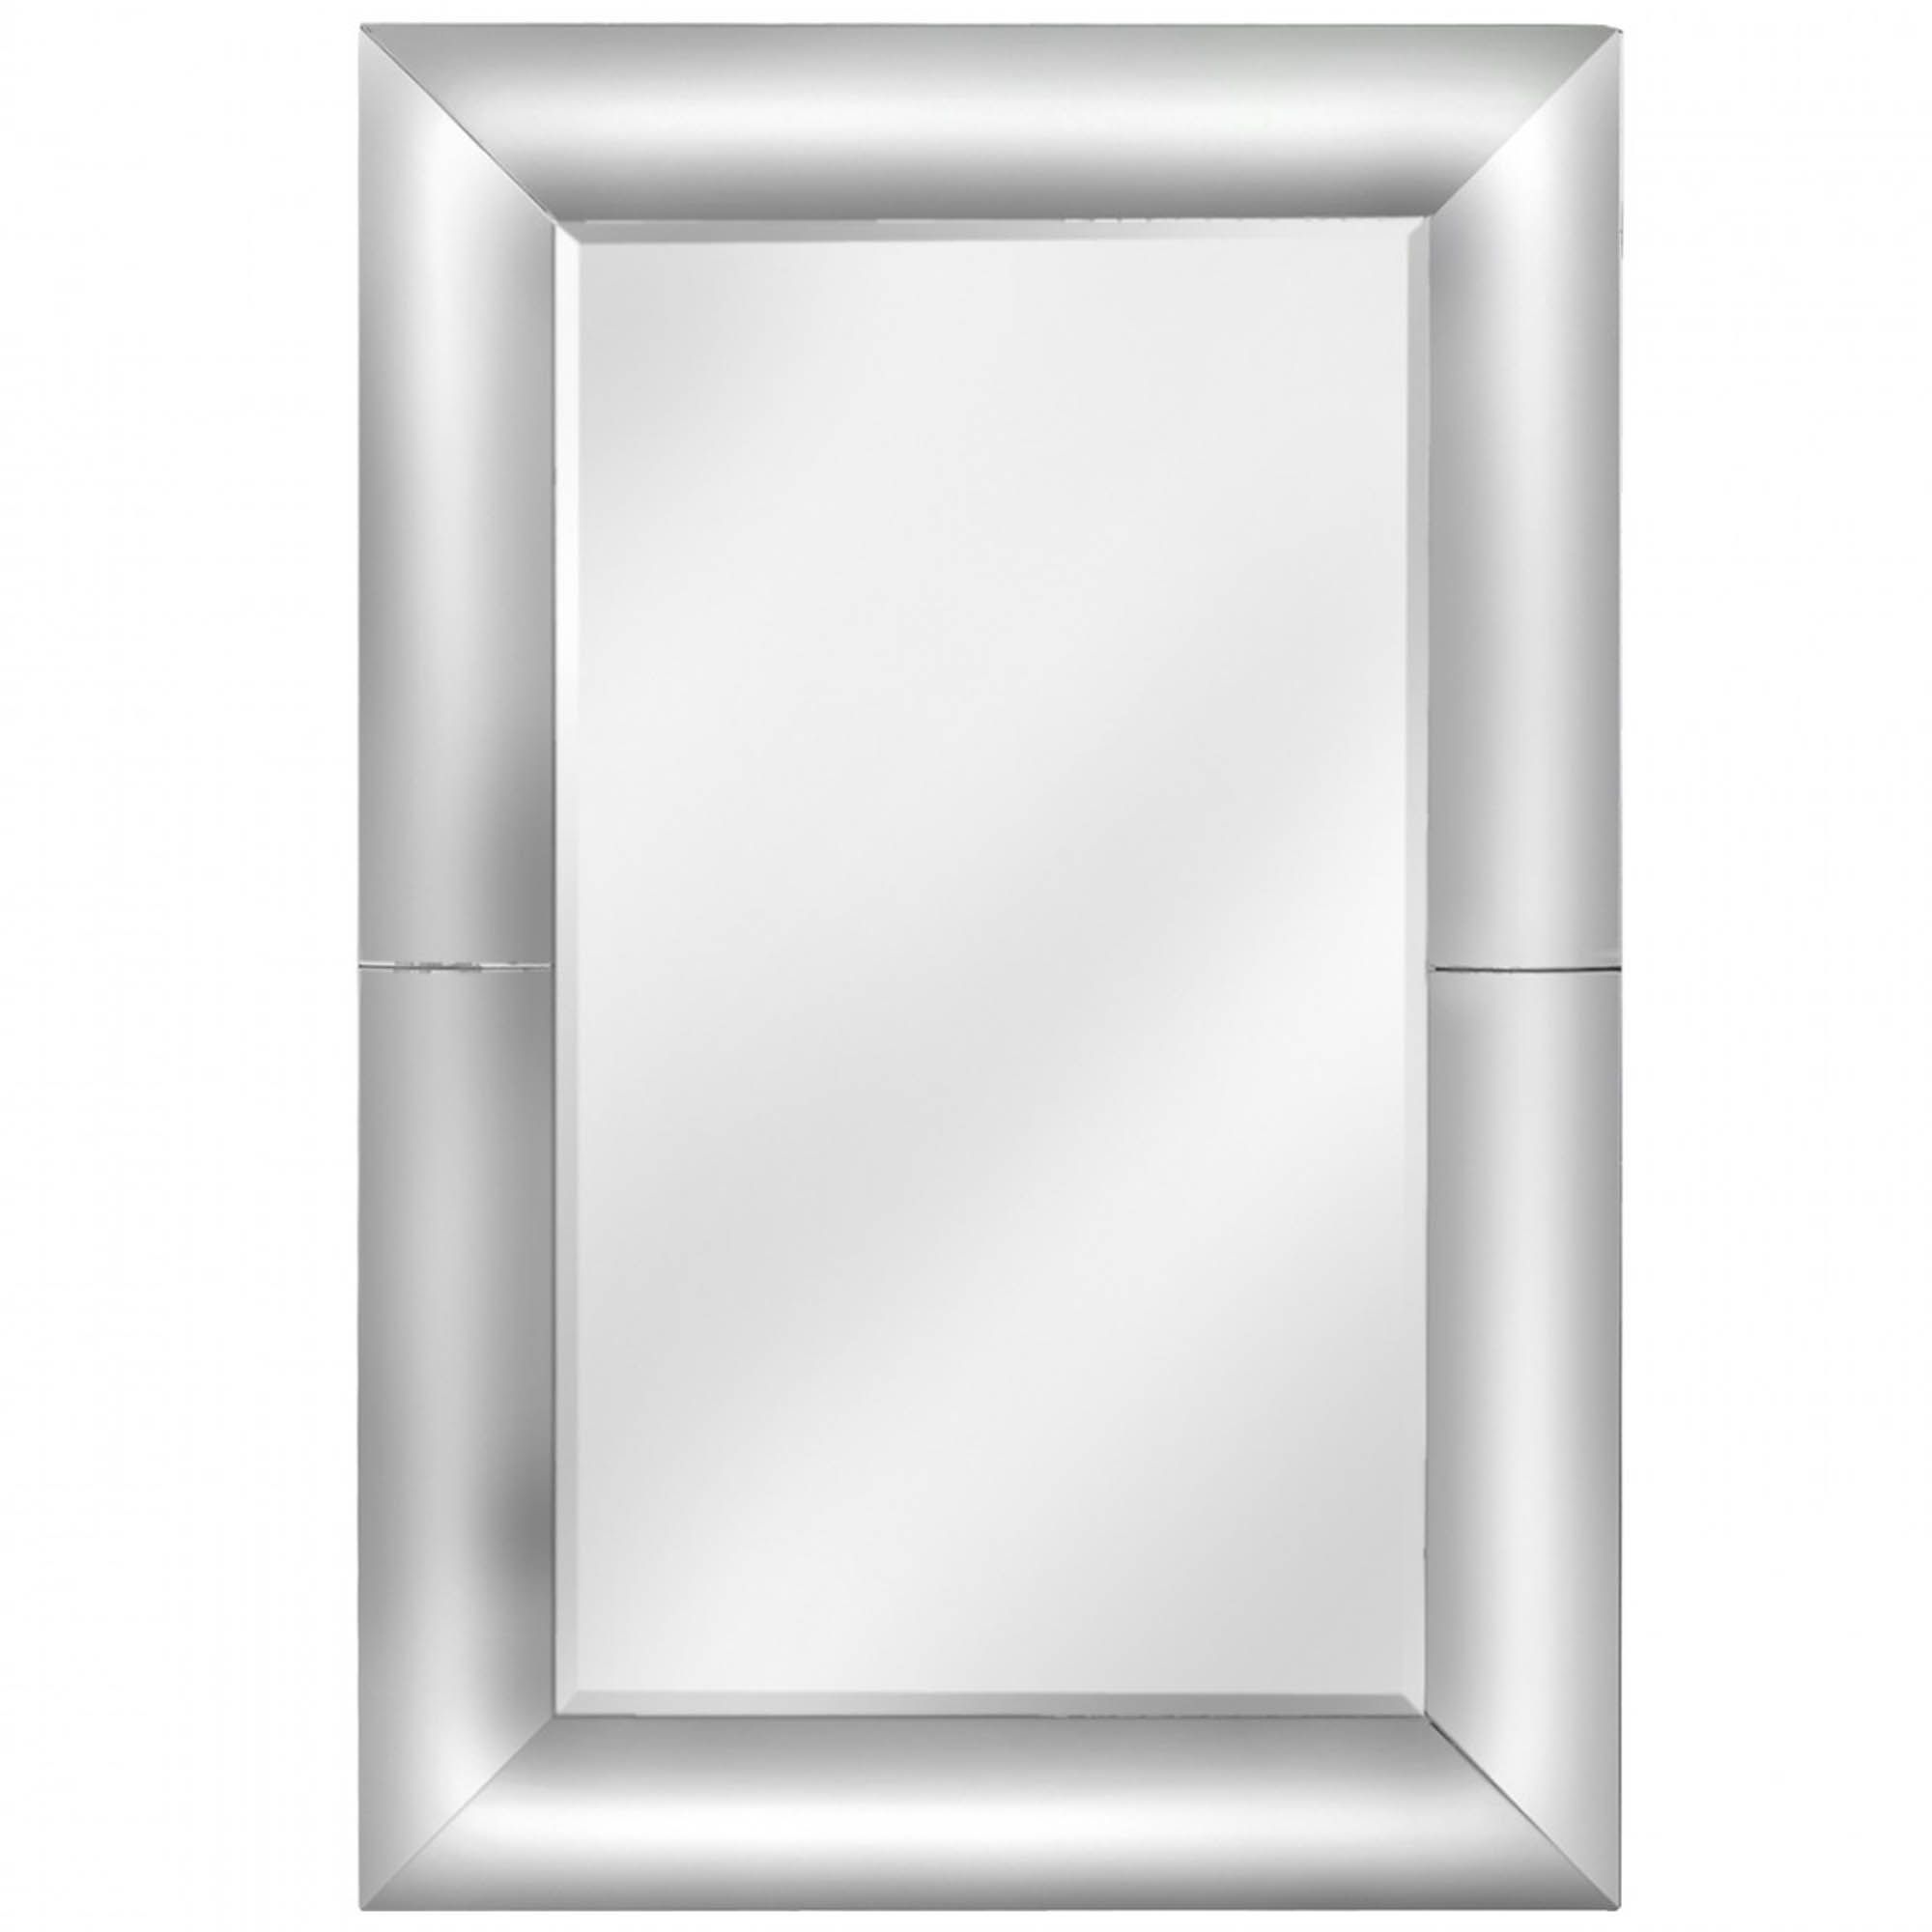 Clear Rectangular Rounded Wall Mirror | Homesdirect365 Throughout Rounded Edge Rectangular Wall Mirrors (View 15 of 15)